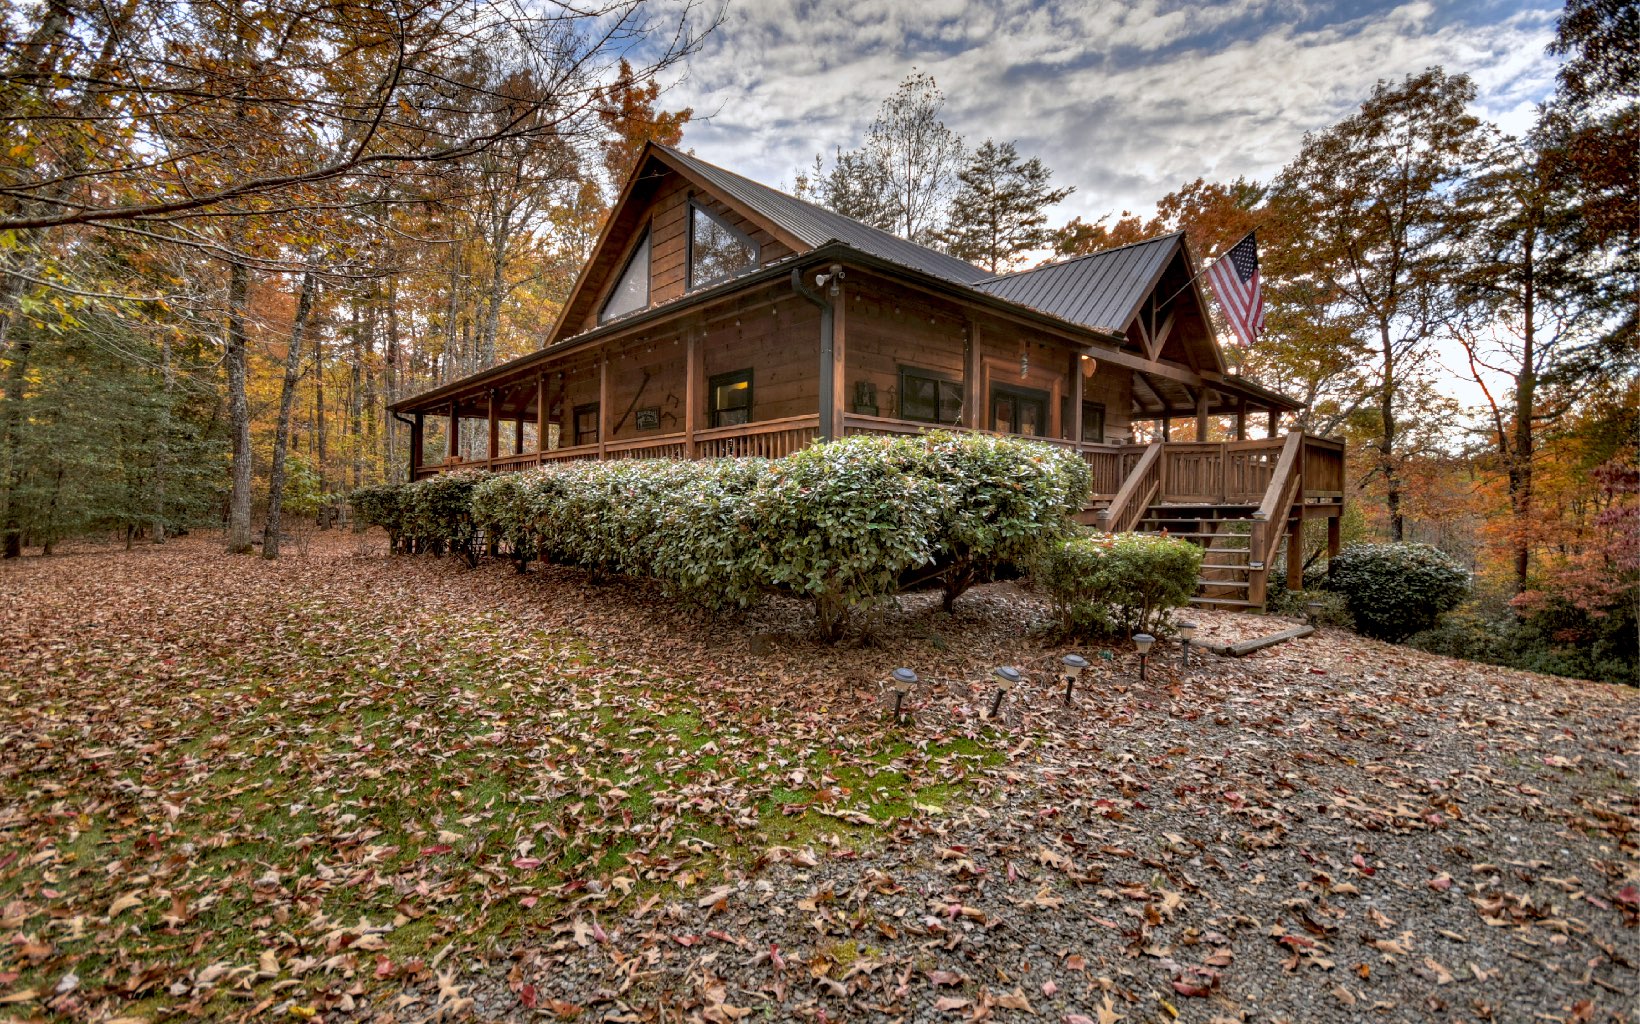 Unique Mountain Cottage nestled in a very desirable River Estates community near Downtown Blue Ridge, this 3br/3.5ba cabin offers privacy & an abundance of wildlife views complete with Toccoa River Access. A rarity for the area. From the front, the home invites you in with its elegant wrap around porch & subtle woodwork details. This true log cabin offers warm finishes that define the inviting & friendly feel. Upon entry you will find the pleasant & comfortable living space complimented by a floor to ceiling stone fireplace & wood beam cathedral ceilings. This well-designed property offers a functional floor plan & convenient main level living area, a spacious Primary en suite on main level, upscale wood interior design, & an oversize loft area that can sleep up to 6. The full finished basement level comes complete w laundry area & addtl entertainment space. Not to be outdone, the walk-out lower level enjoys an appealing covered patio w possible fire pit area, access to the large, manicured backyard & storage shed for tools. Perfectly placed to enjoy all that Blue Ridge has to offer w low maintenance living & a world of recreation right out the door. Blue Ridge offers the finest in culture, shopping & dining. It is a mecca for year-round recreational activities & offers endless opportunities golfing, fishing, hiking, biking, rafting, kayaking & more. Enjoy its endless beauty throughout the seasons!